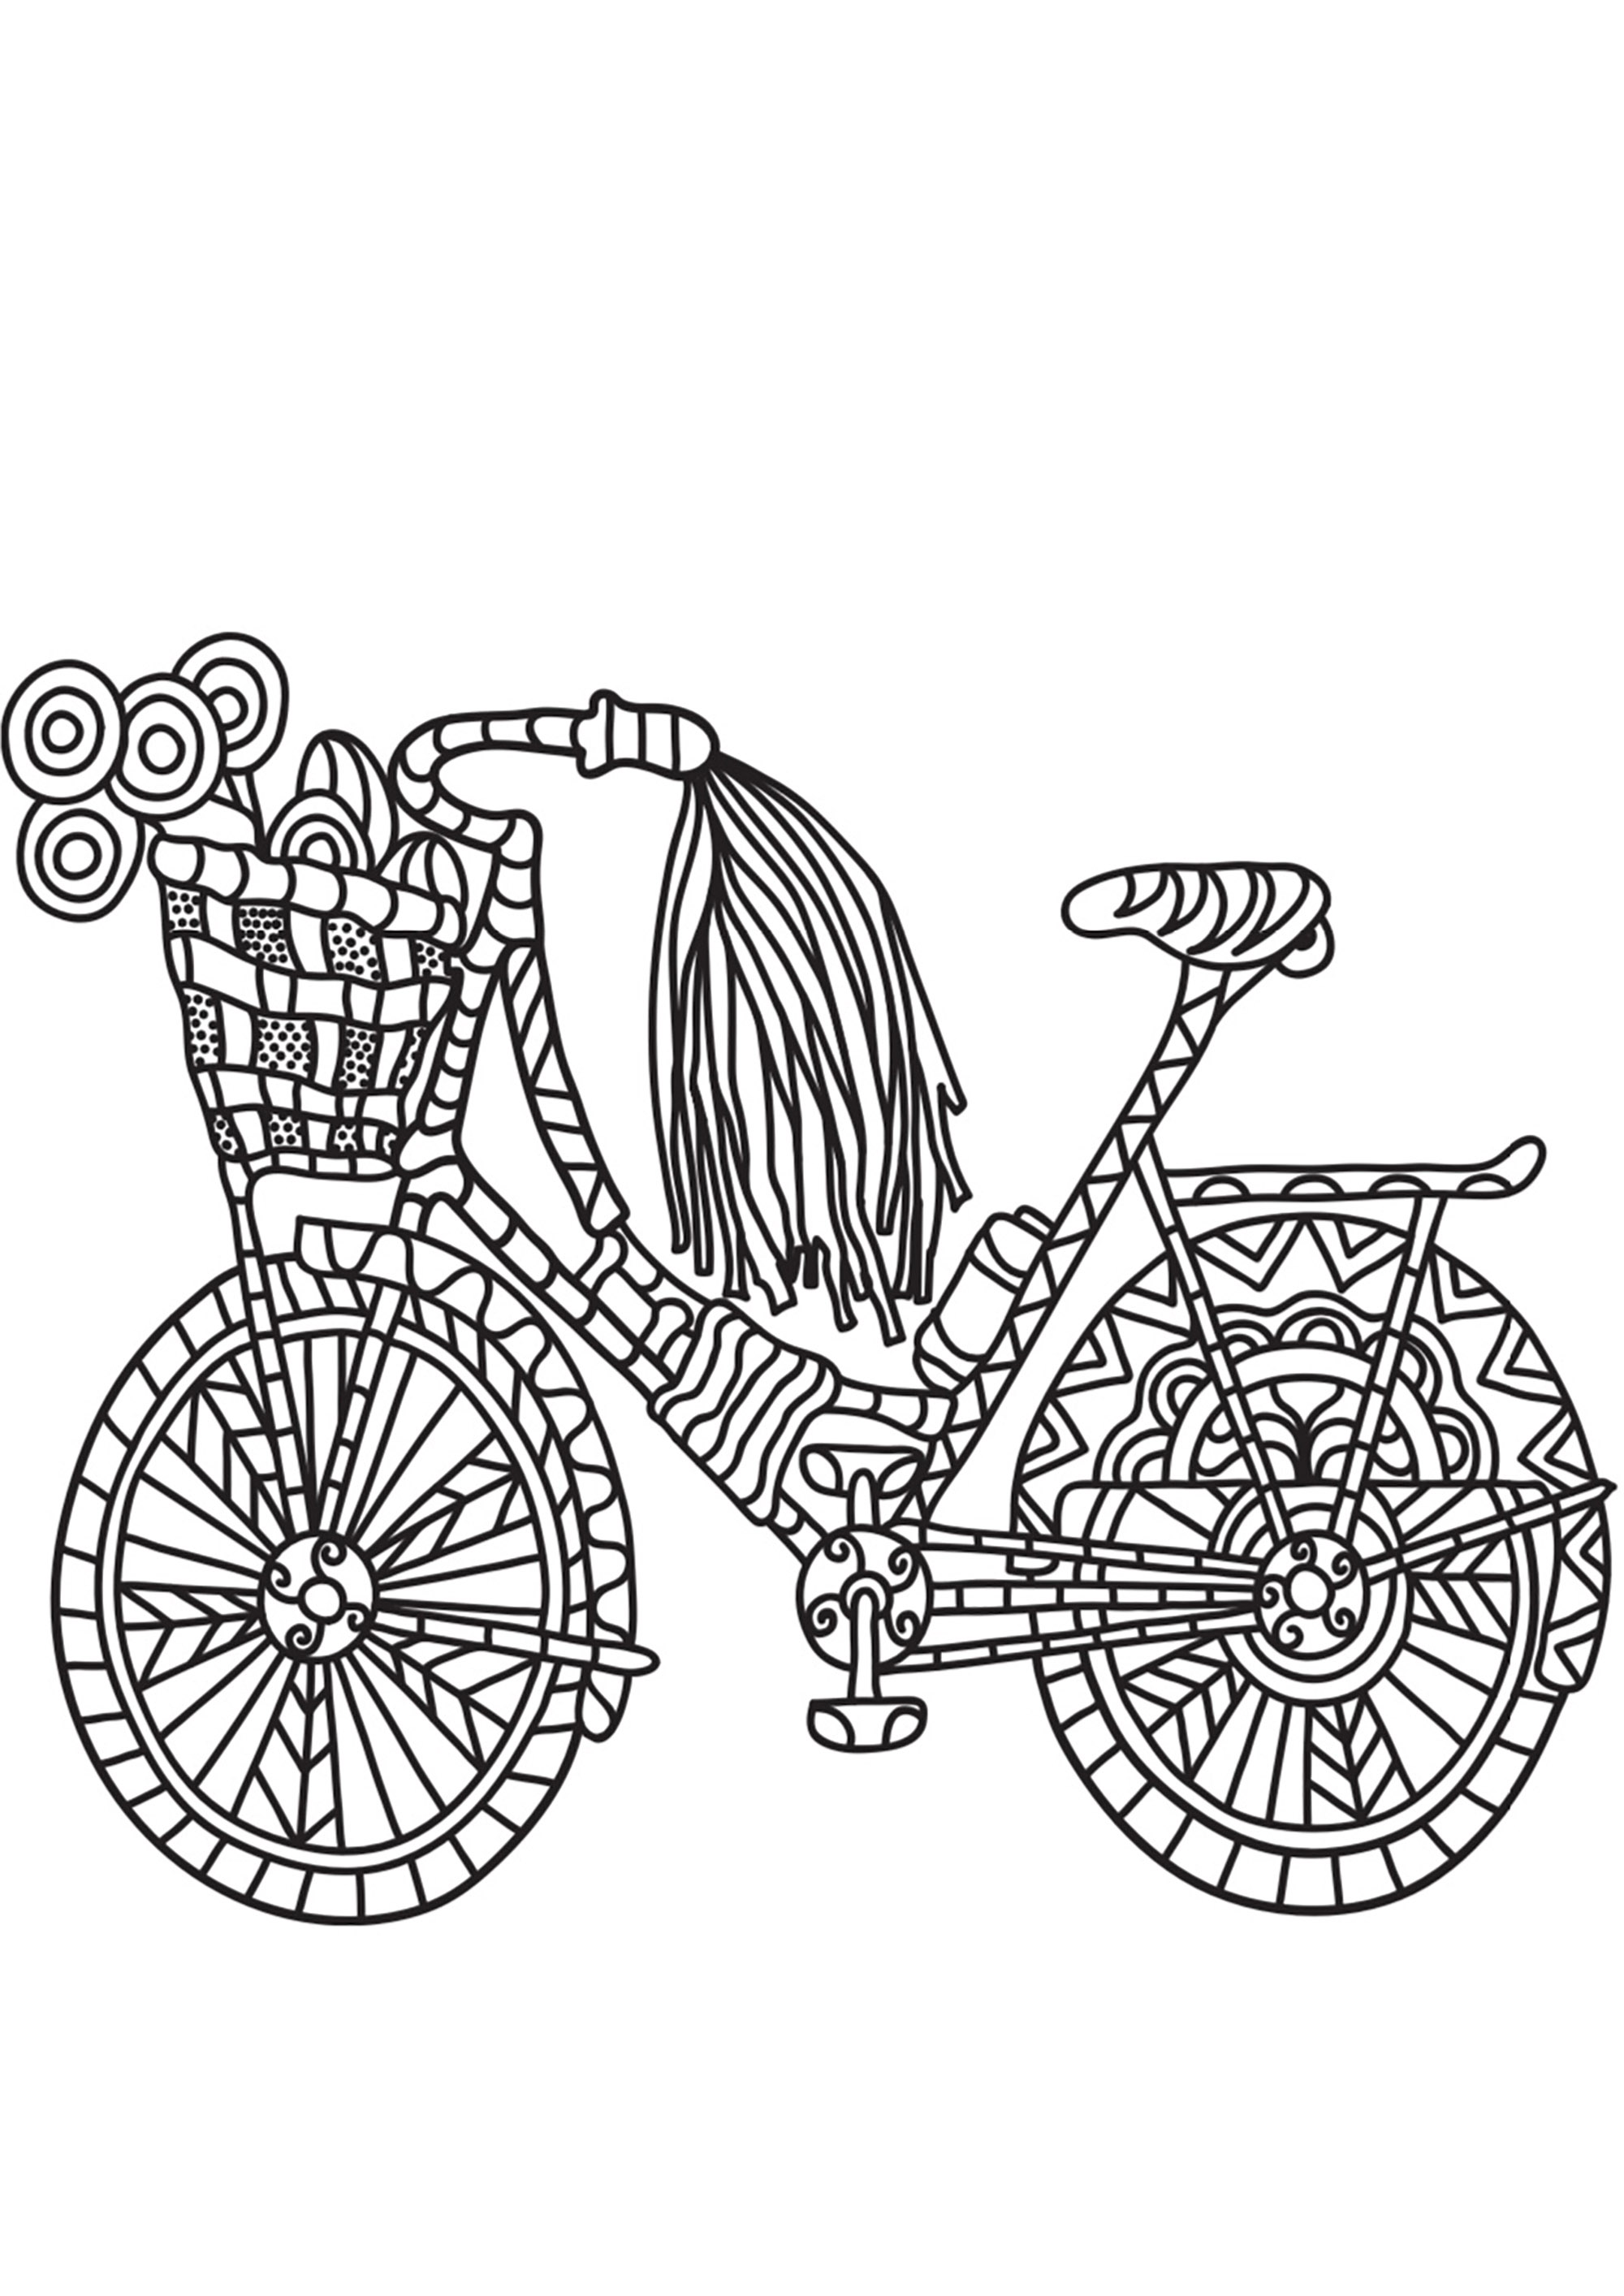 Simple bicycle design with simple motifs. A coloring book to take you back to childhood